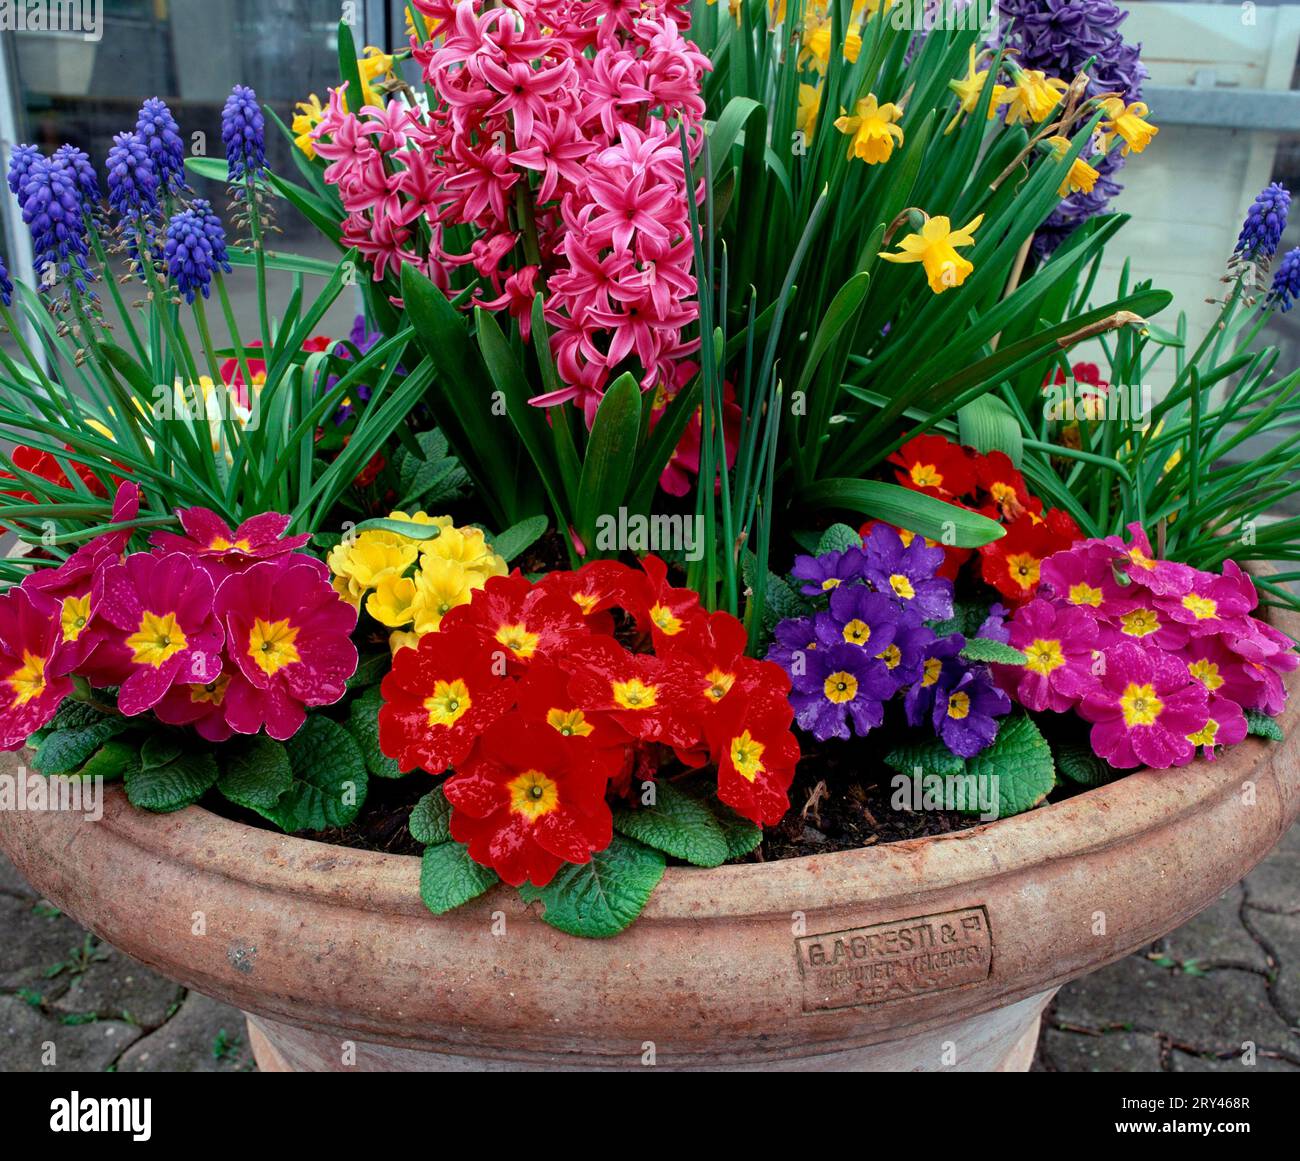 Tub with spring flowers: garden primroses, hyacinths and daffodils Stock Photo